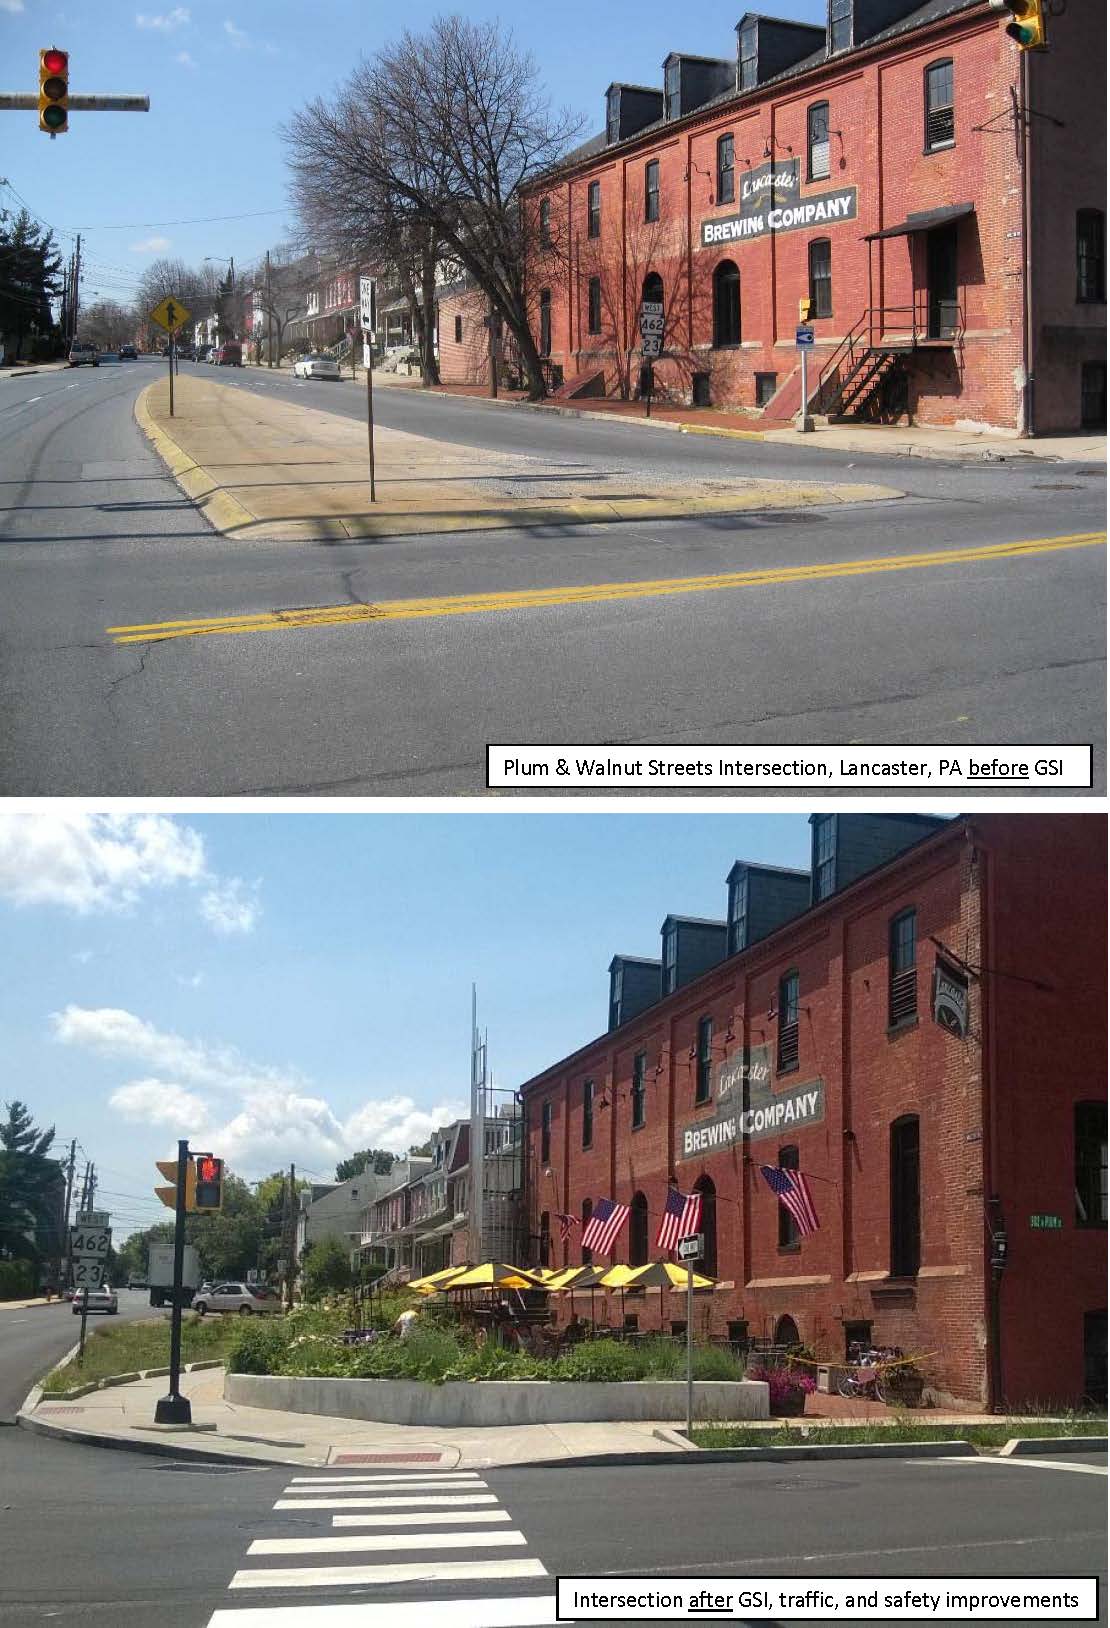 The City of Lancaster, Pa., improved traffic and pedestrian safety, implemented significant green infrastructure, and enhanced a local business through this integrated, public-private partnership project at the Plum and Walnut intersection.  